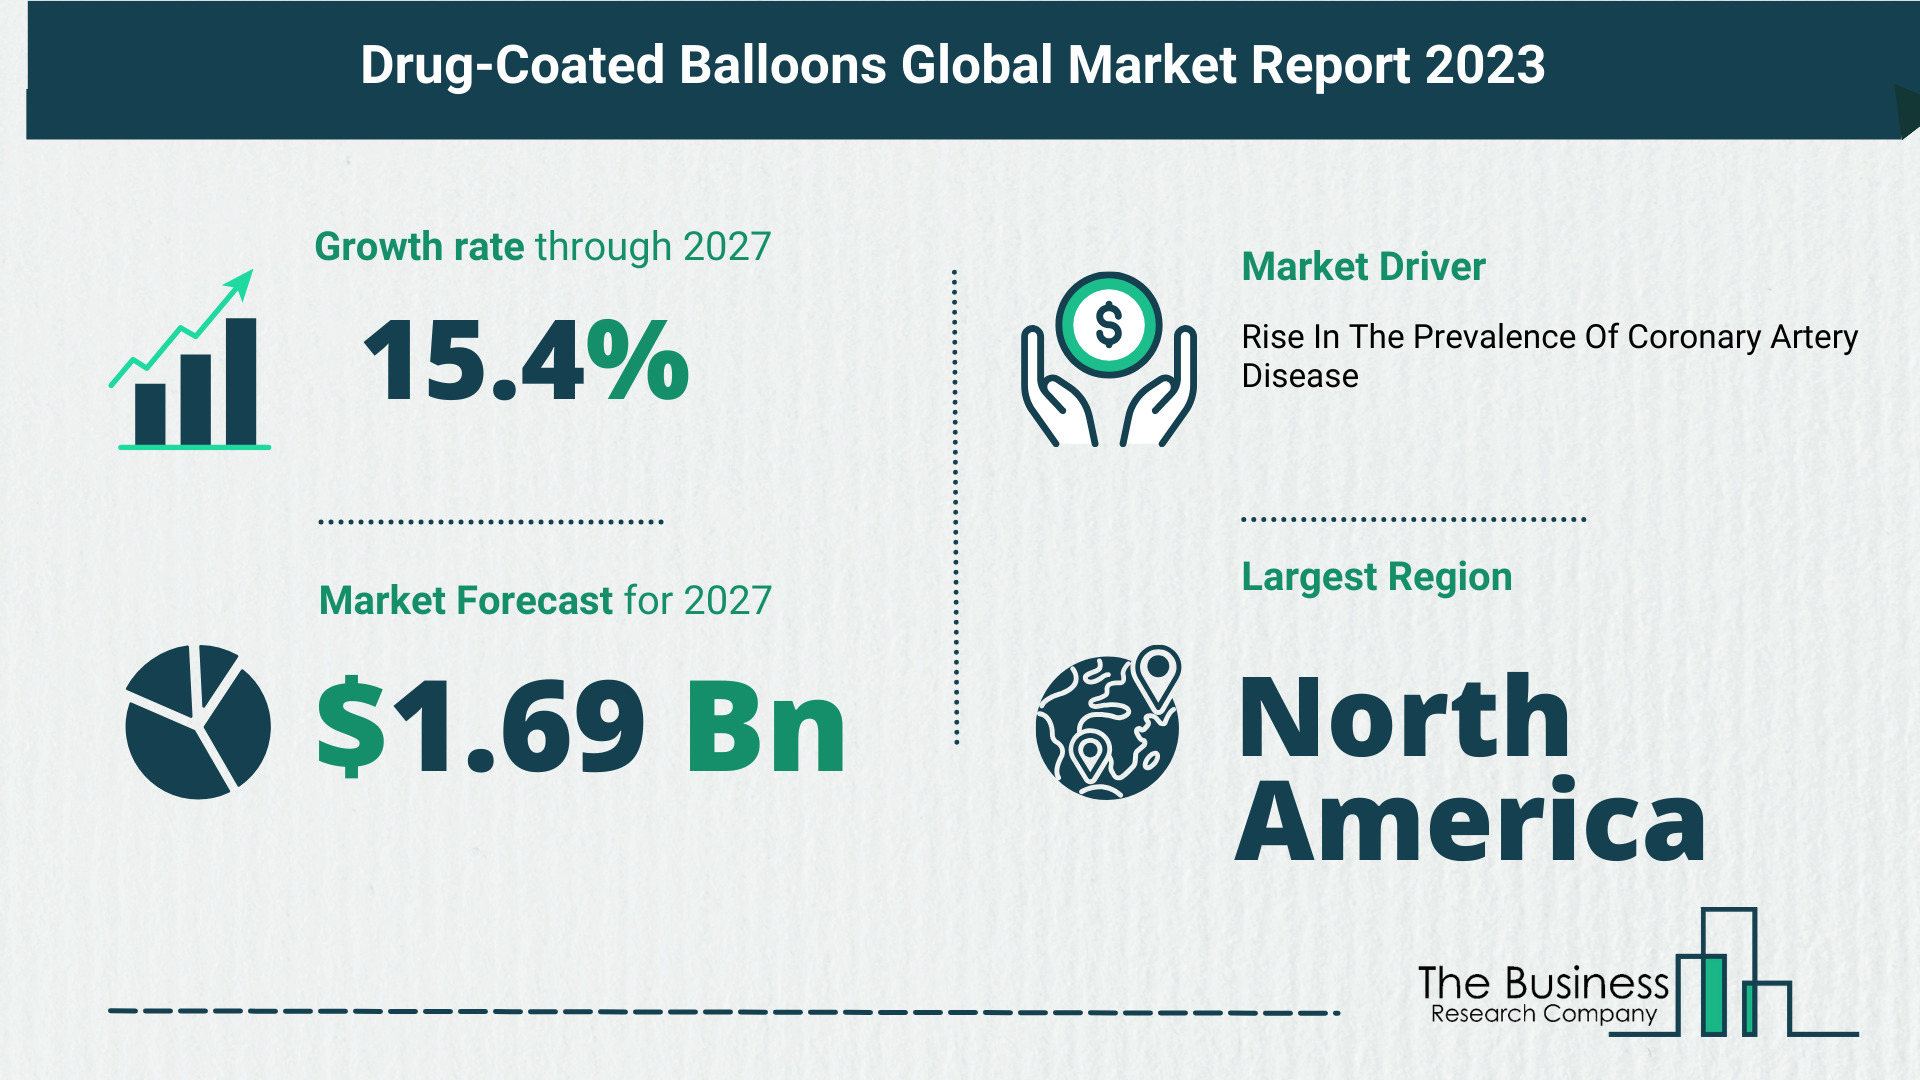 Top 5 Insights From The Drug-Coated Balloons Market Report 2023